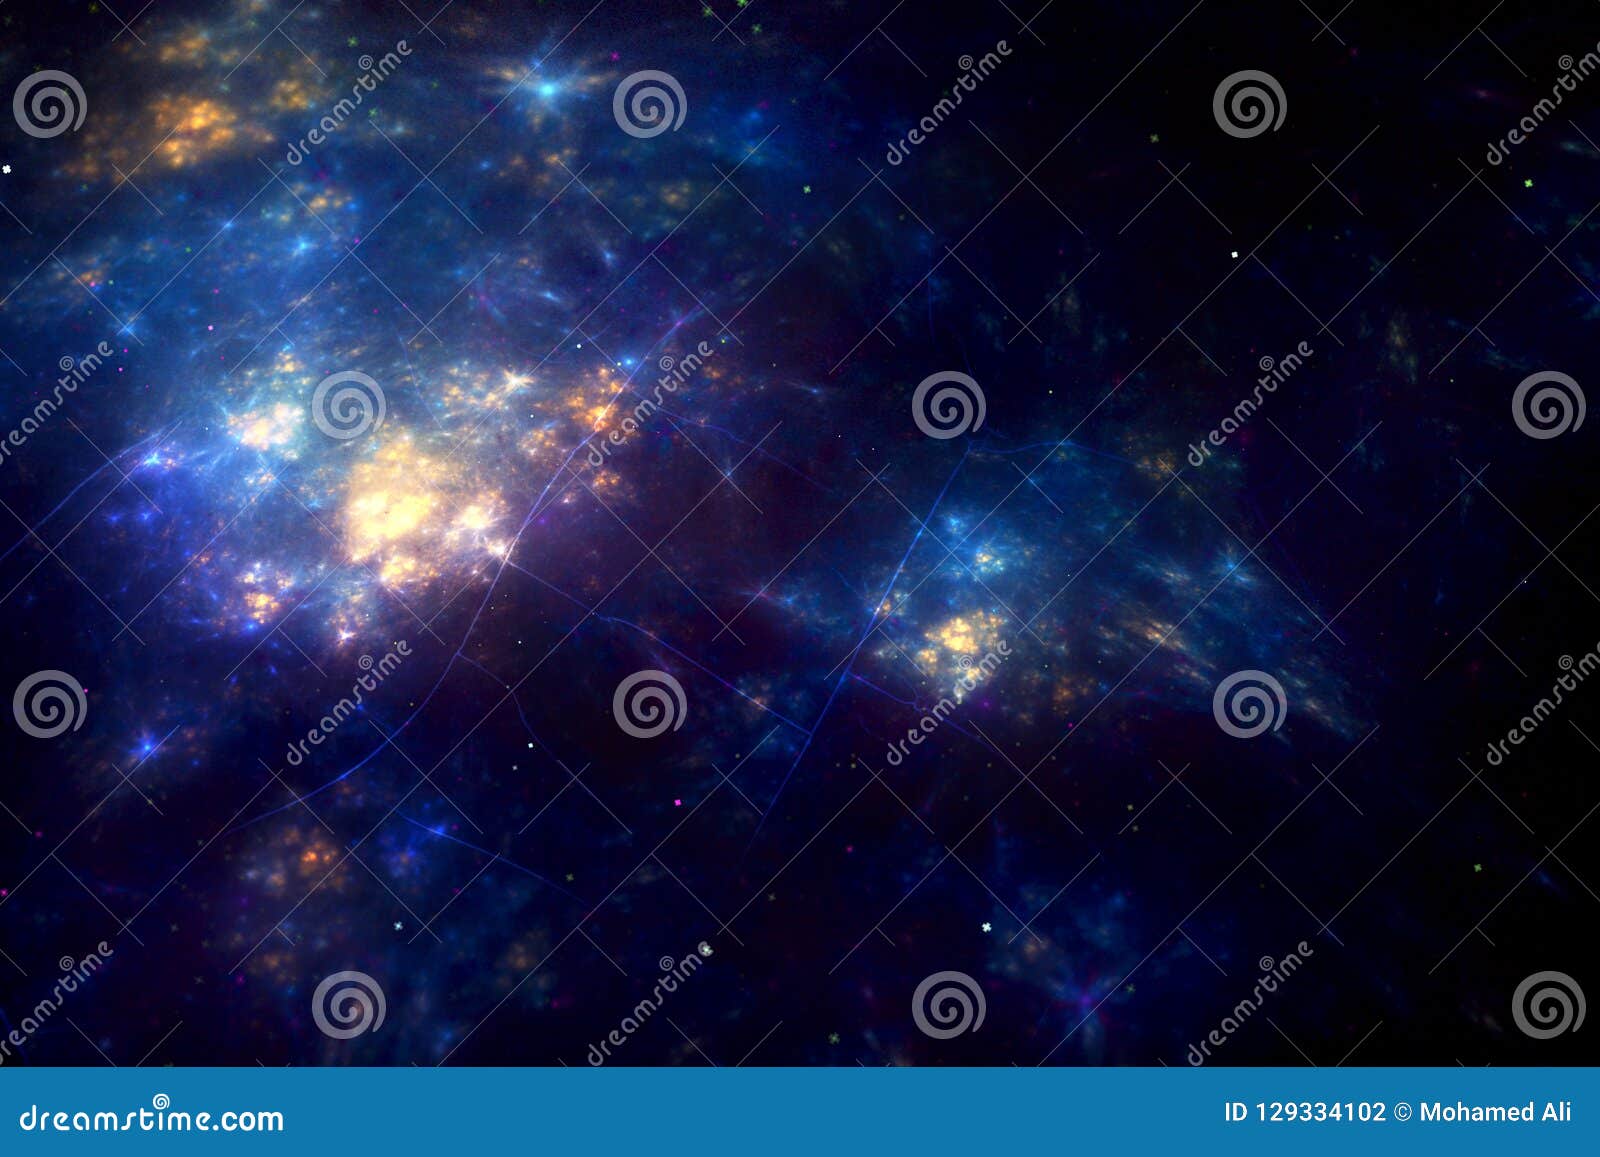 Artistic Abstract Colorful Smooth Dark Galaxy Background Stock Illustration Illustration Of Infinity Color 129334102